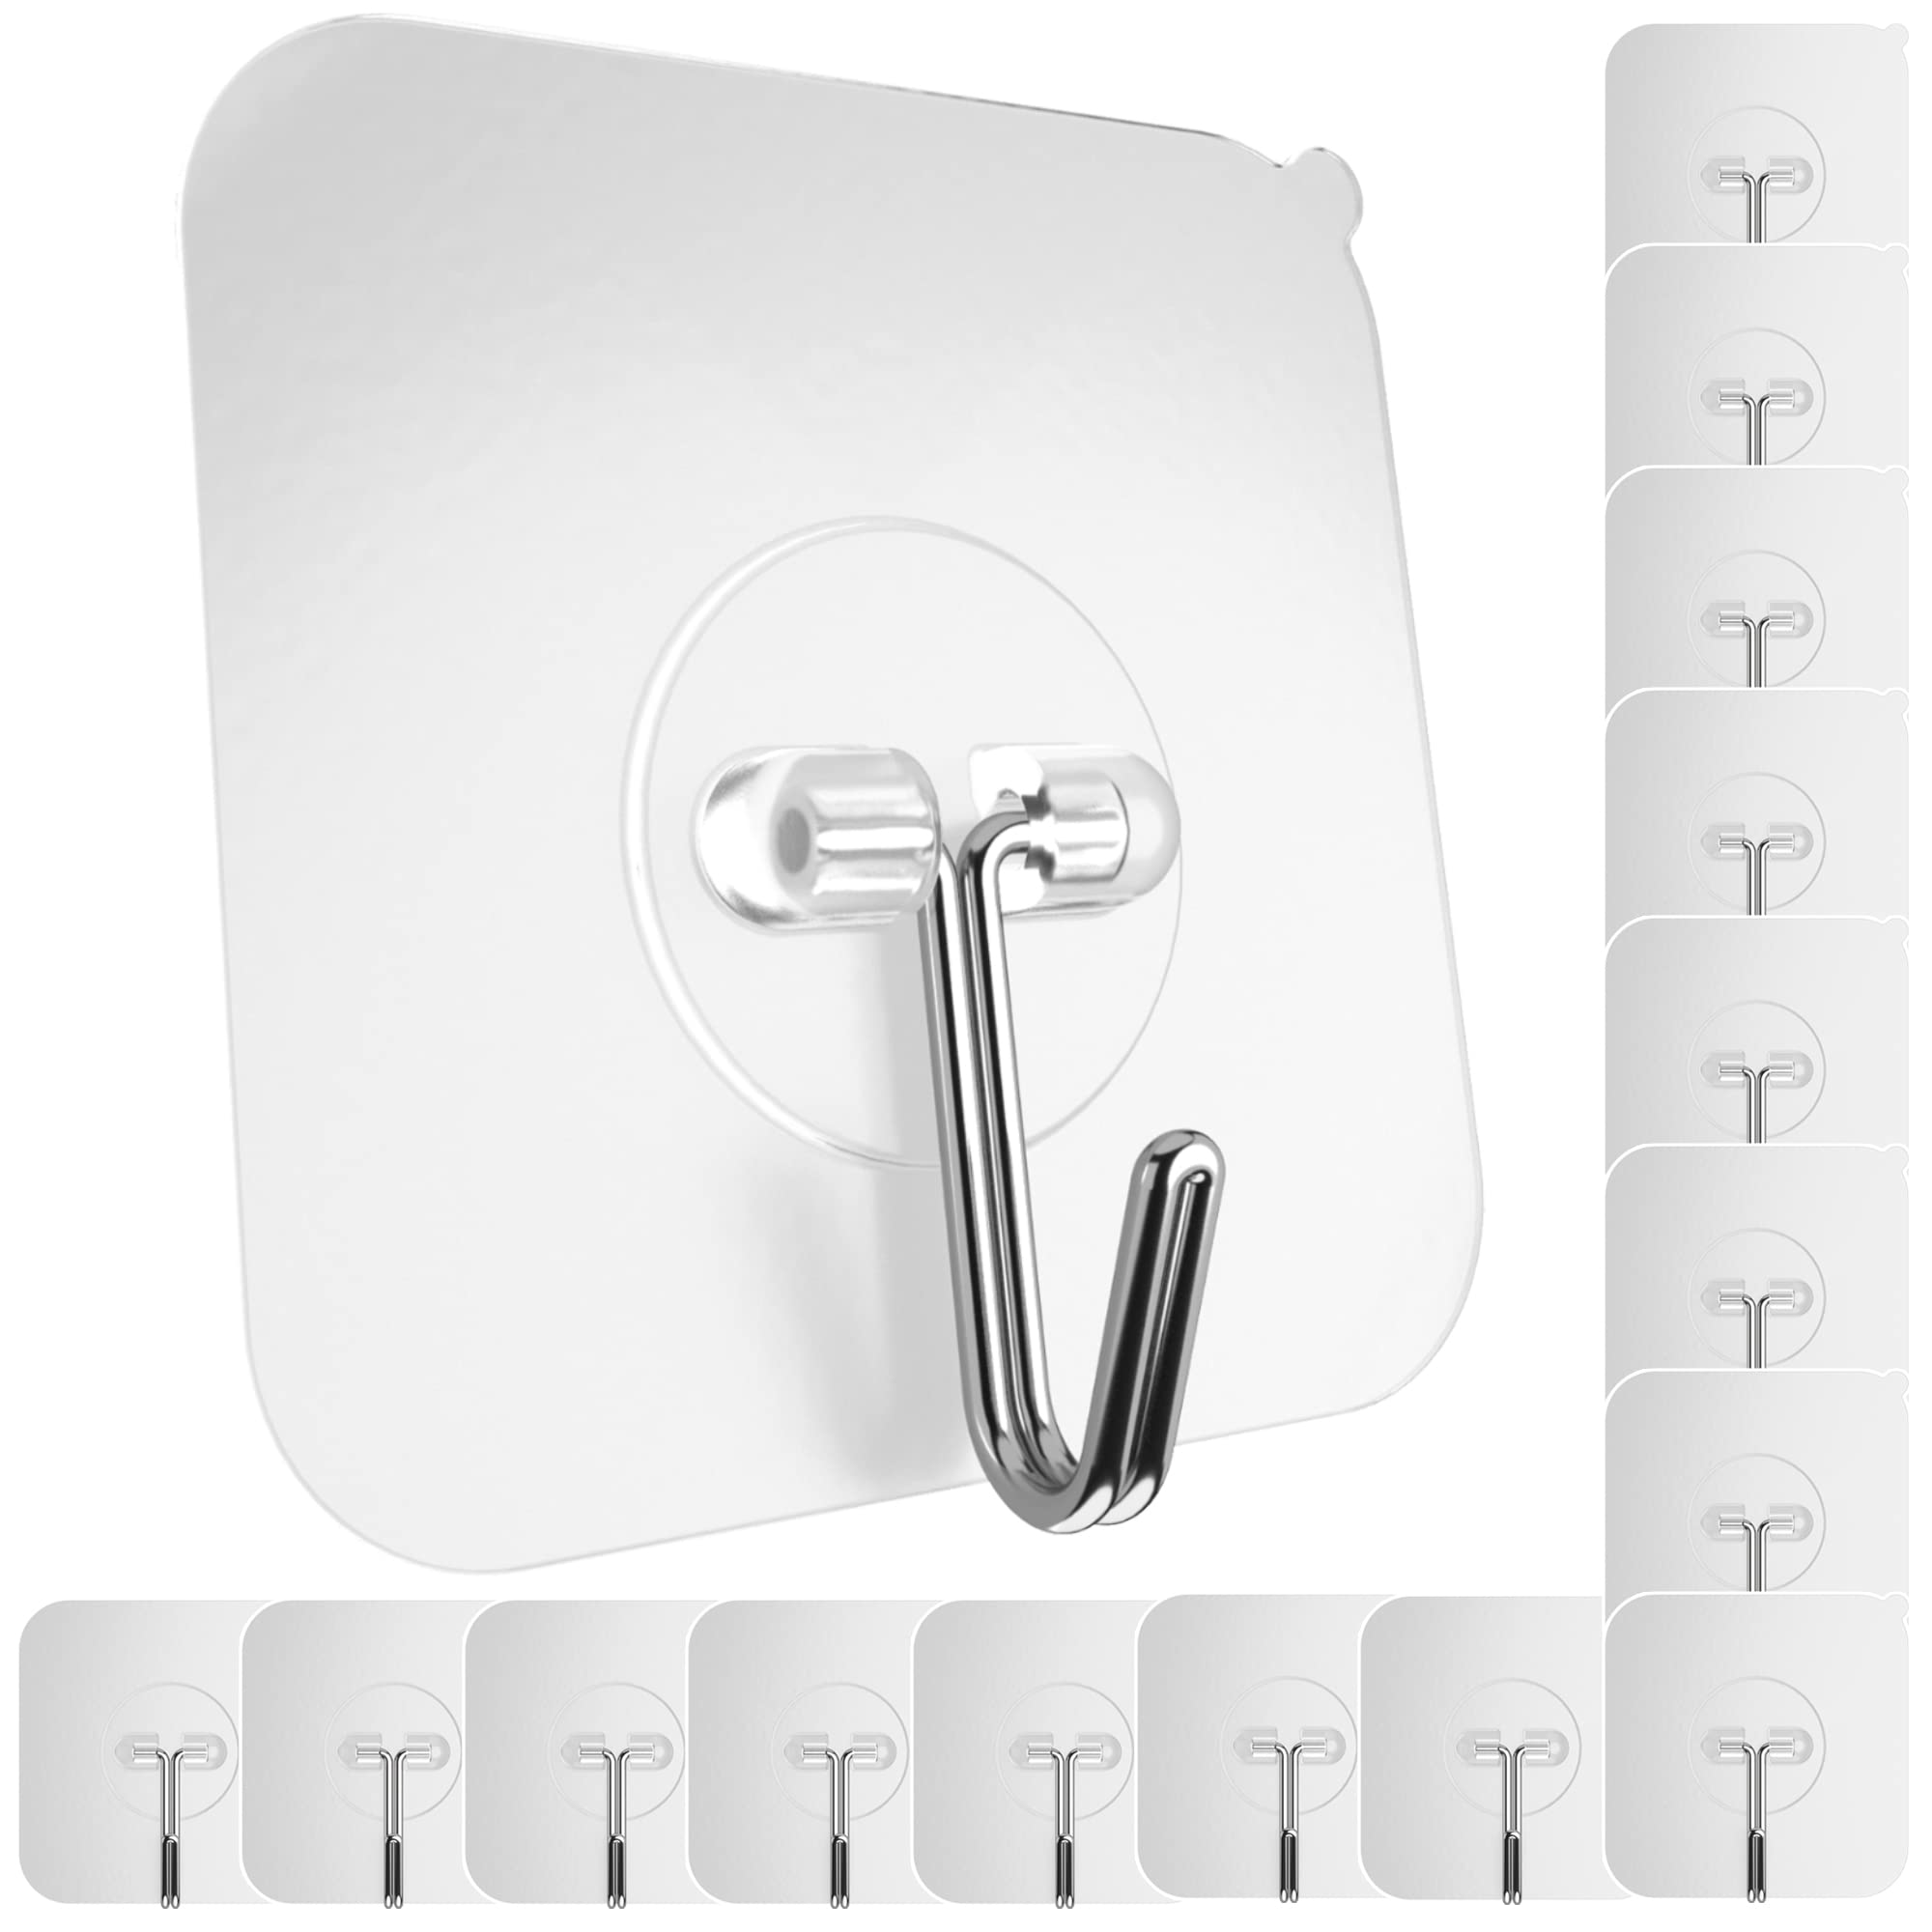 GLUIT Adhesive Hooks Heavy Duty 22 lbs Robe Towel Hooks Waterproof Adhesive Wall Hooks for Home Bathroom Kitchen Office and Outd